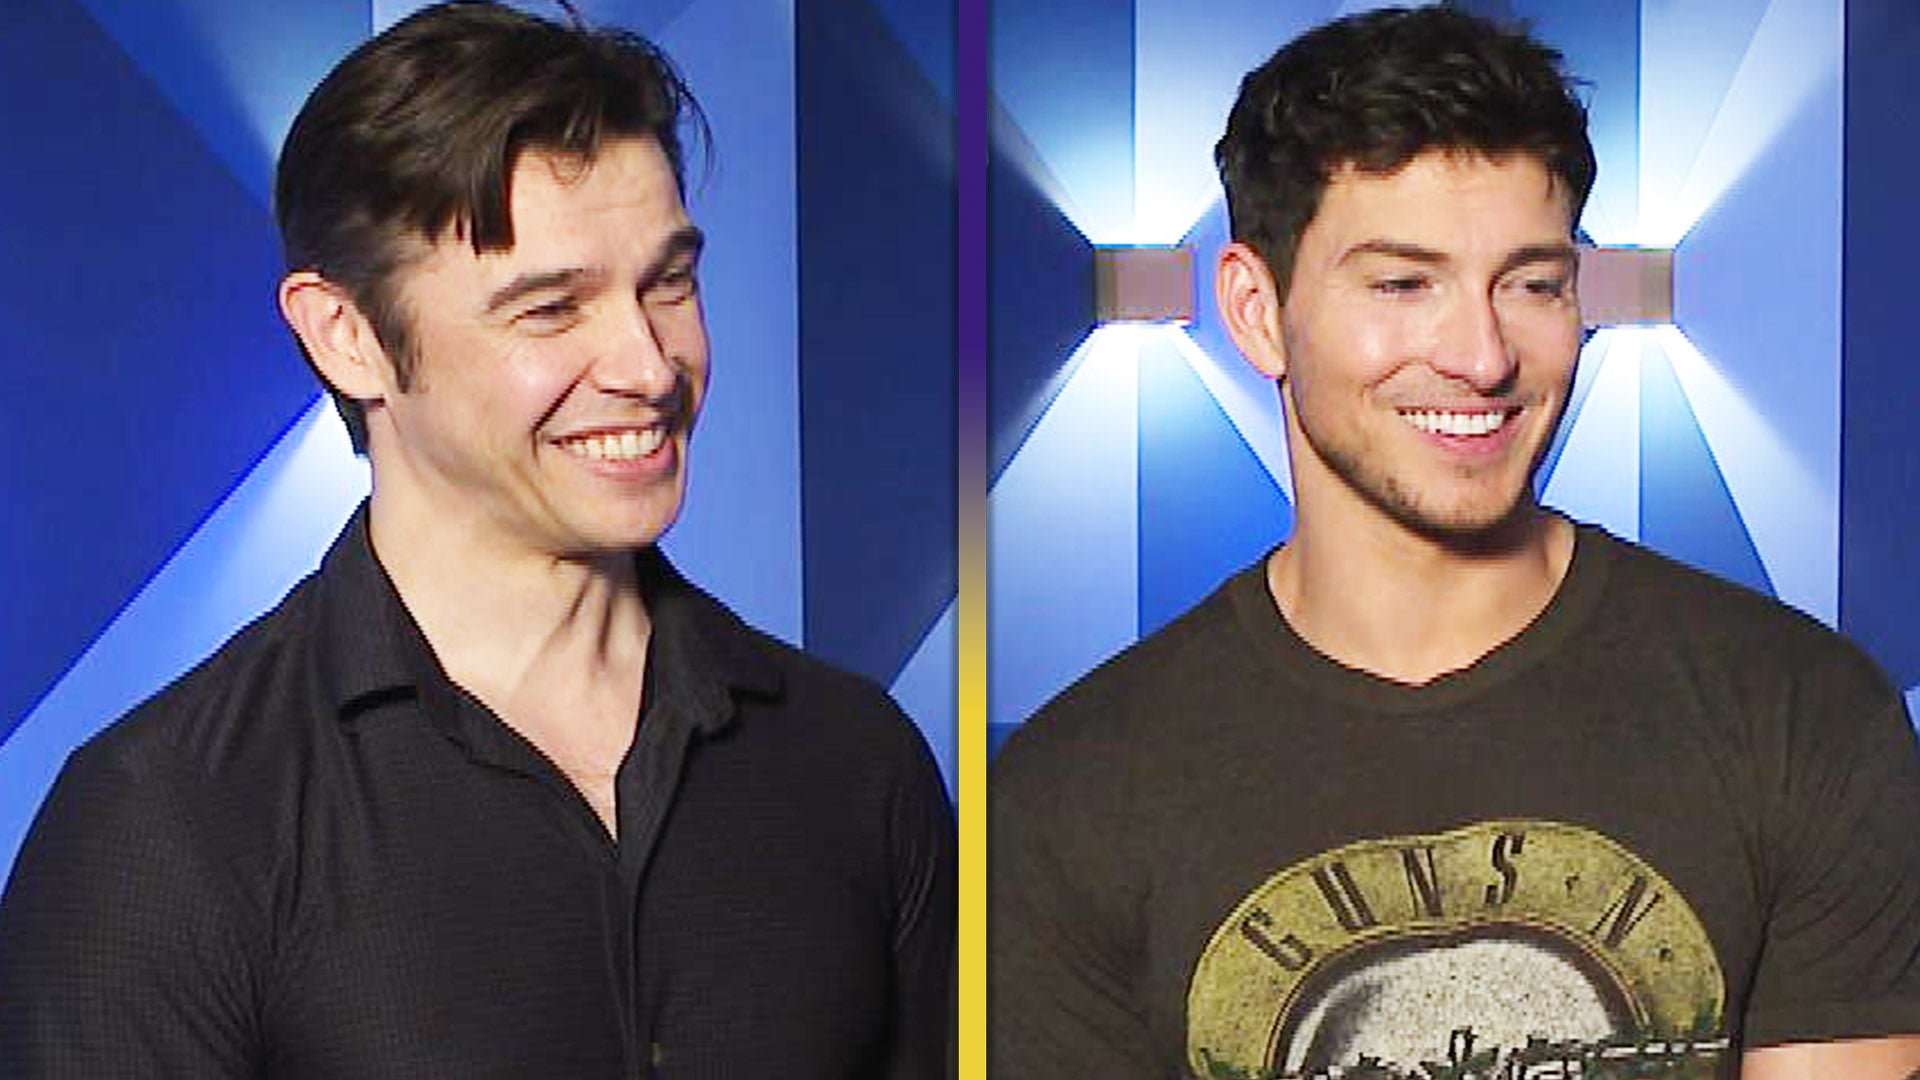 ‘Days of Our Lives’ Stars Paul Telfer and Robert Scott Wilson Dish on Stripping Down for 'Playgirl'